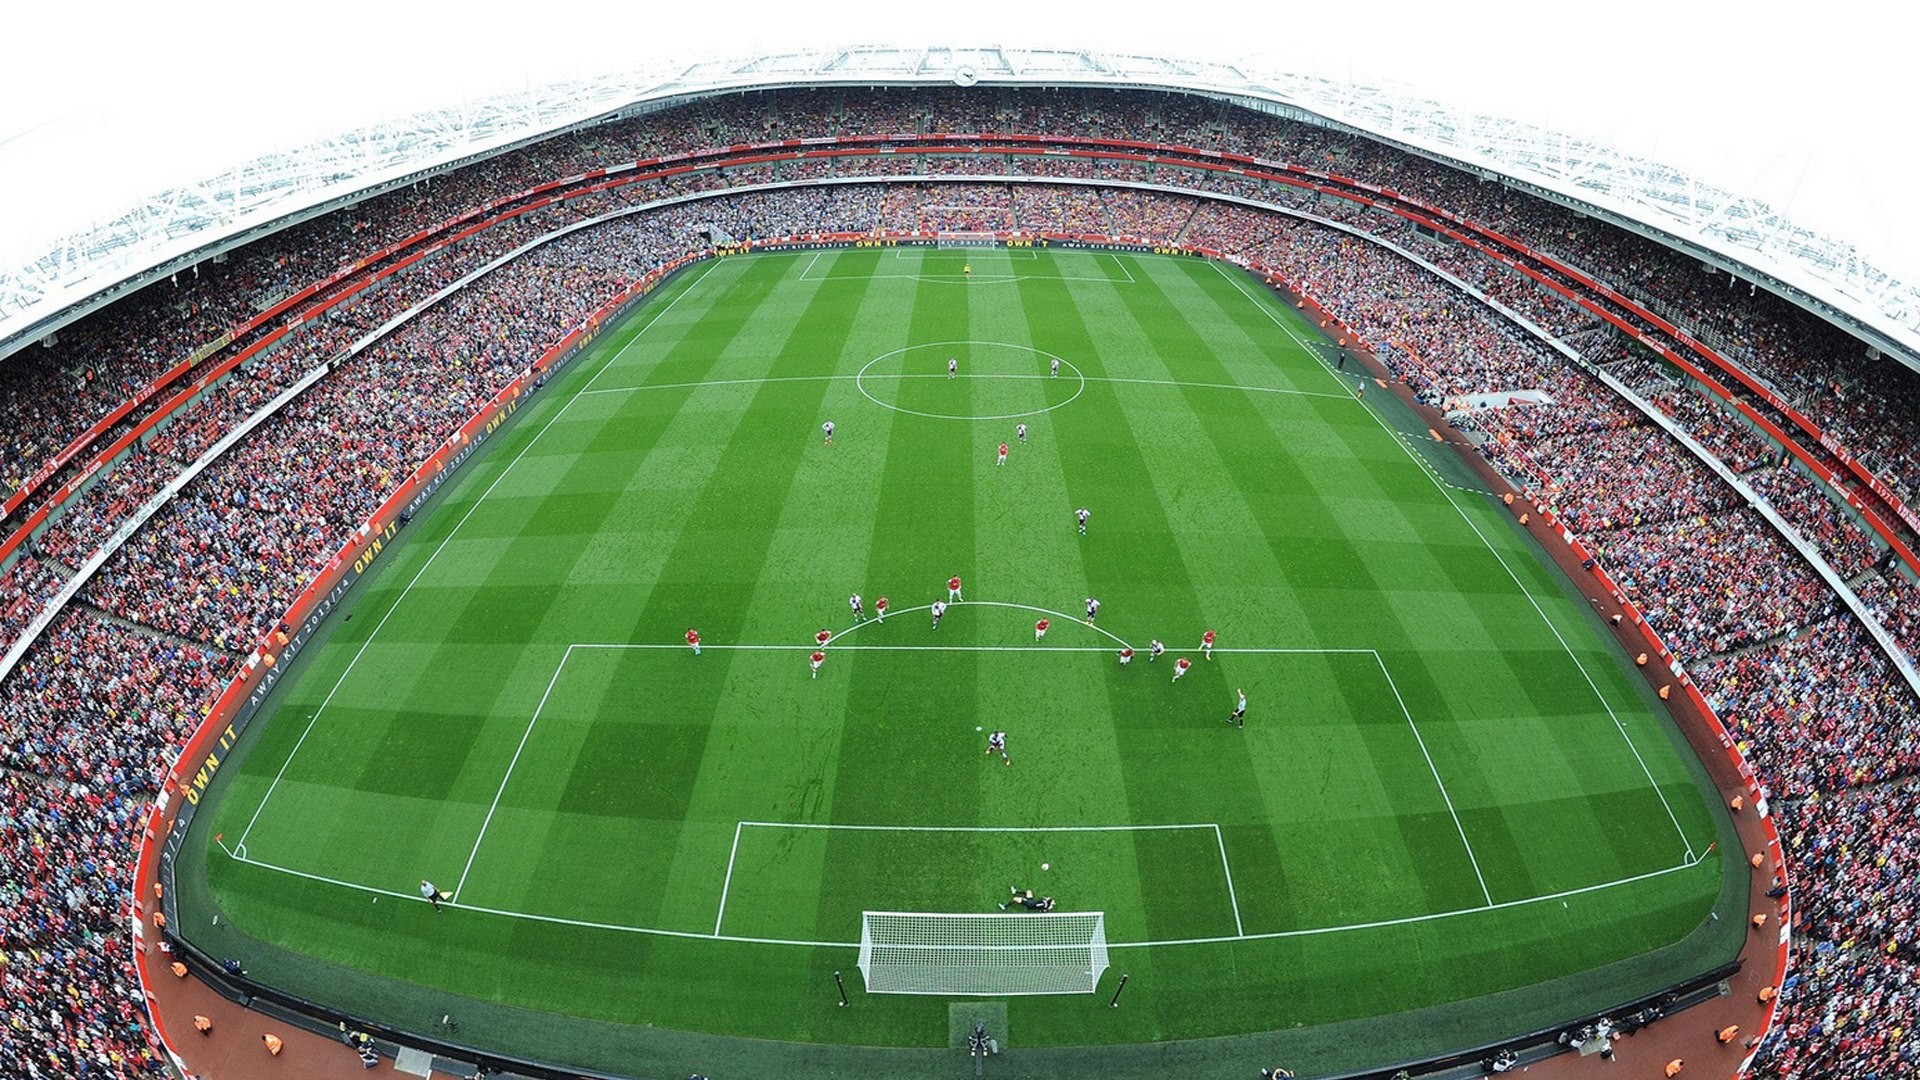 1920x1080 Emirates Stadium - Arsenal FC wallpapers and images - wallpapers .